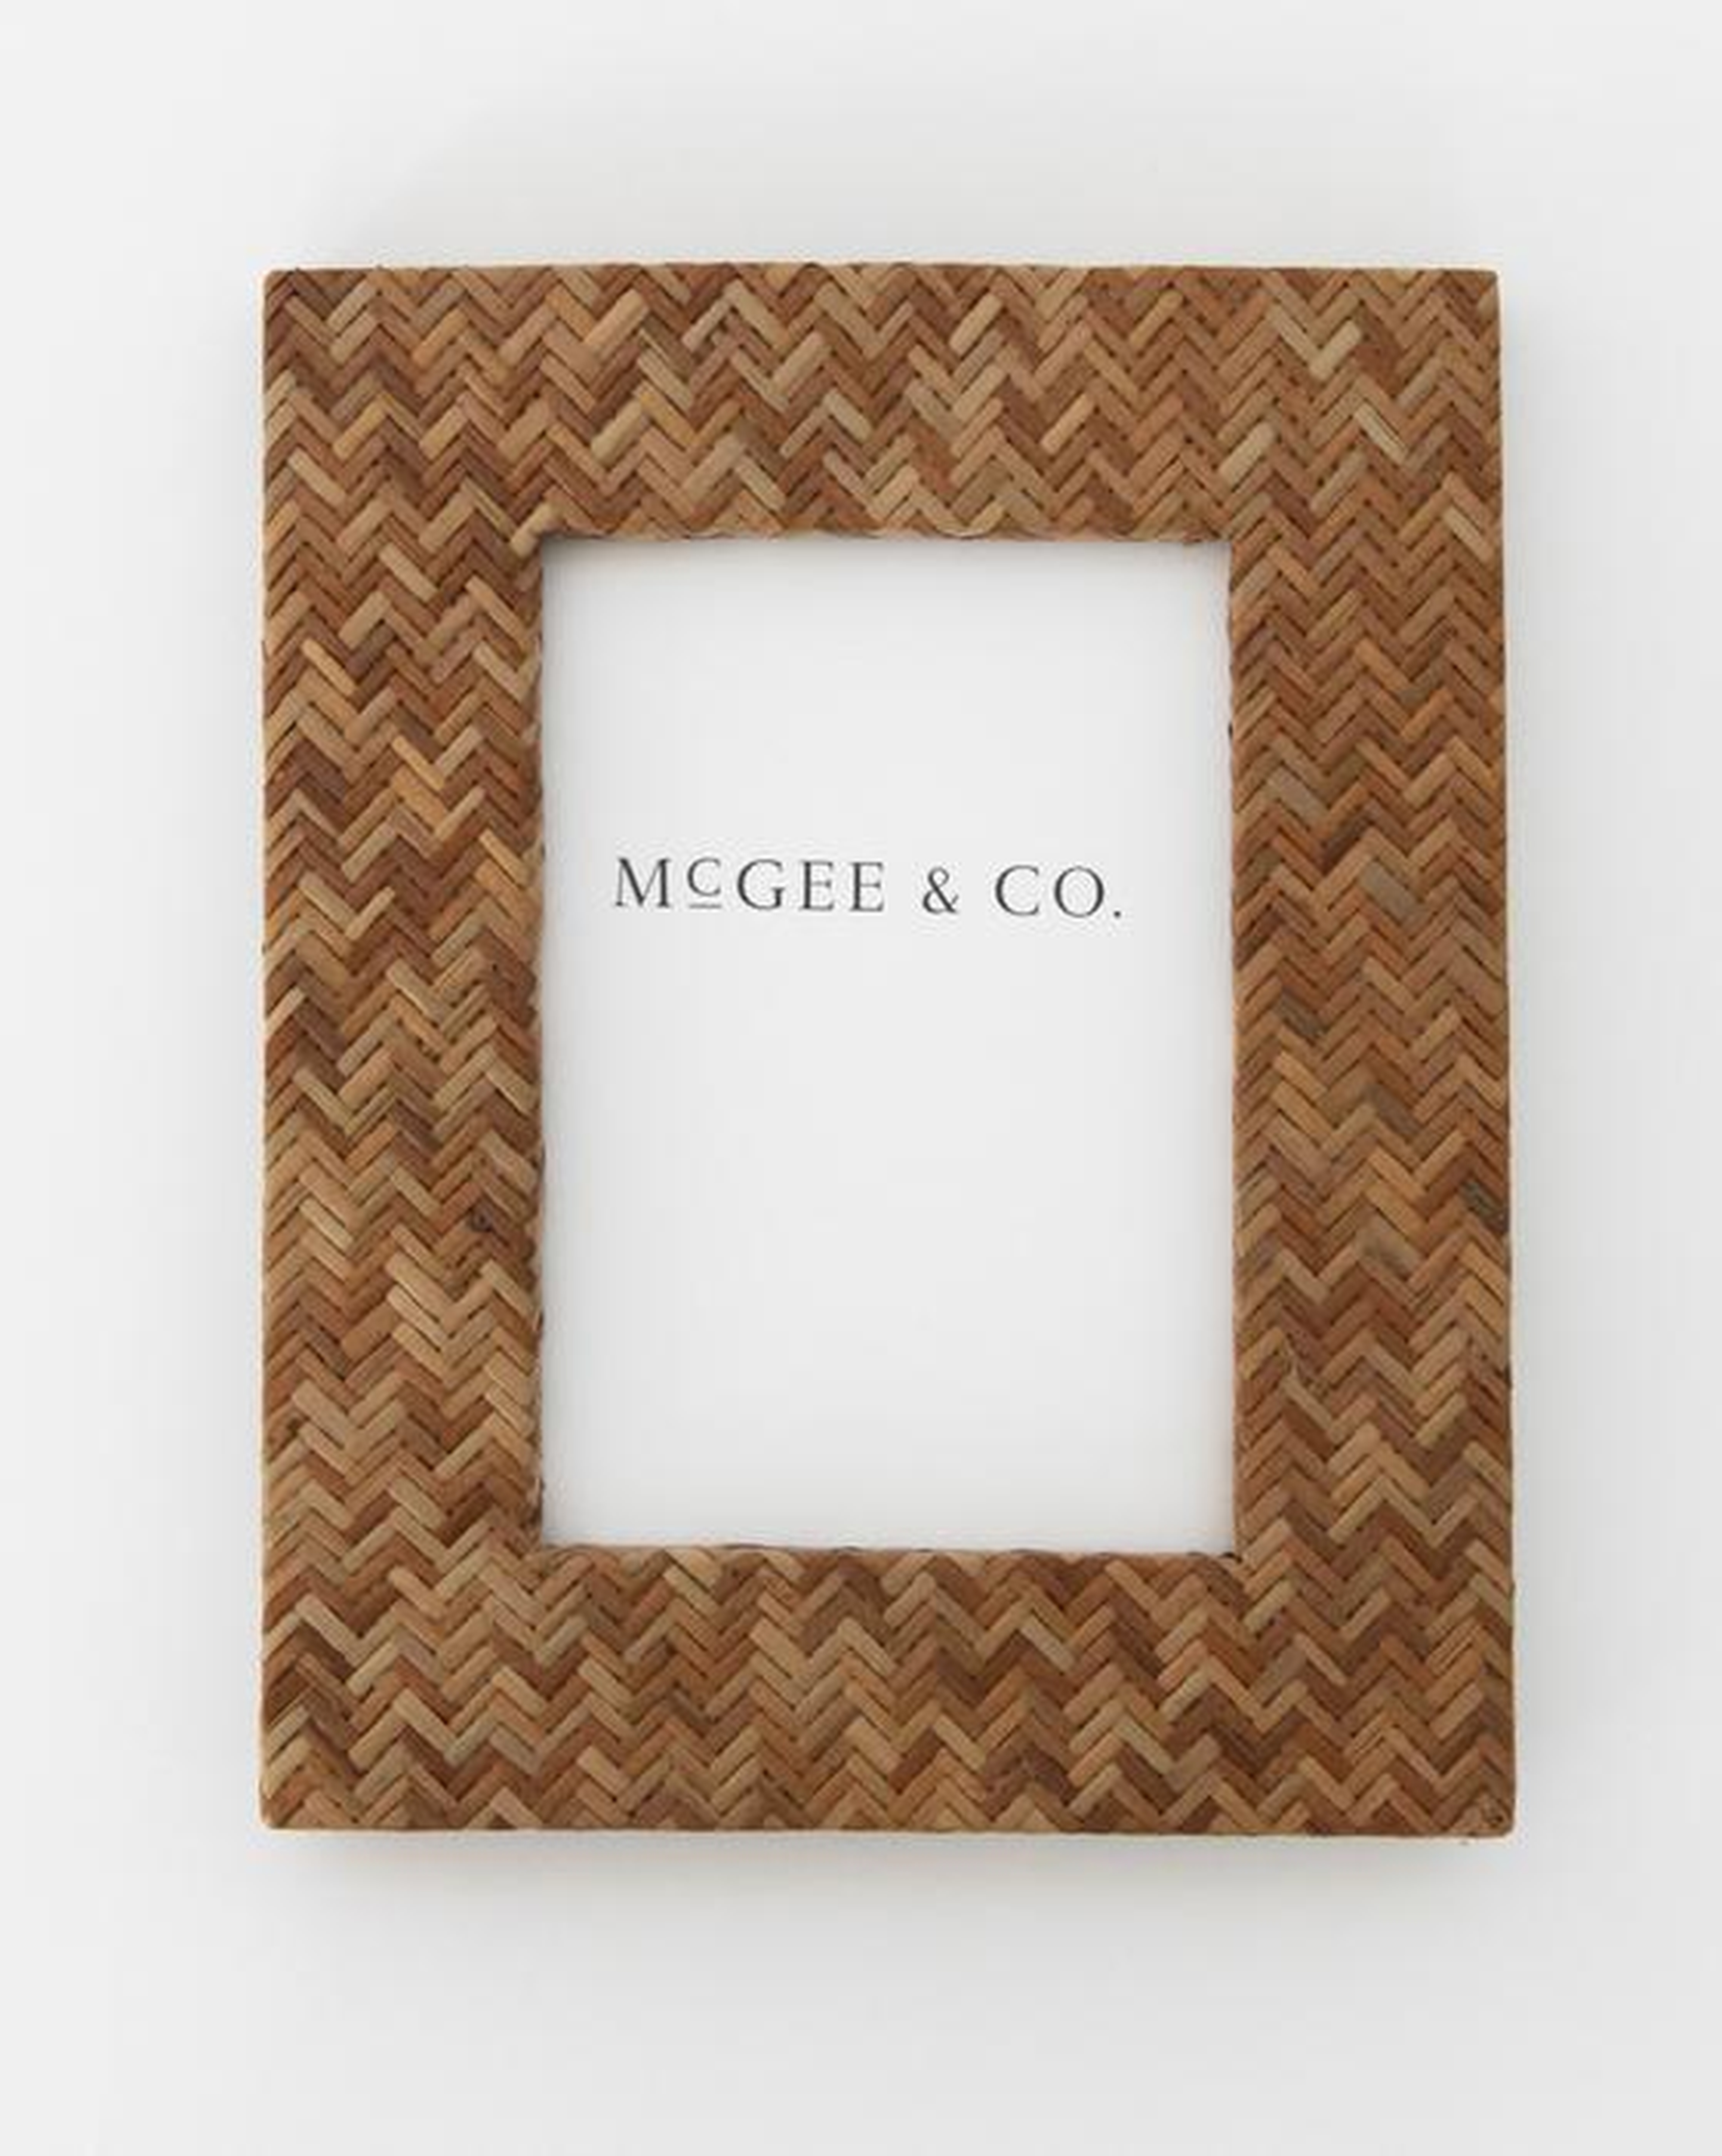 Double Weave Frame, Large 5x7 - McGee & Co.